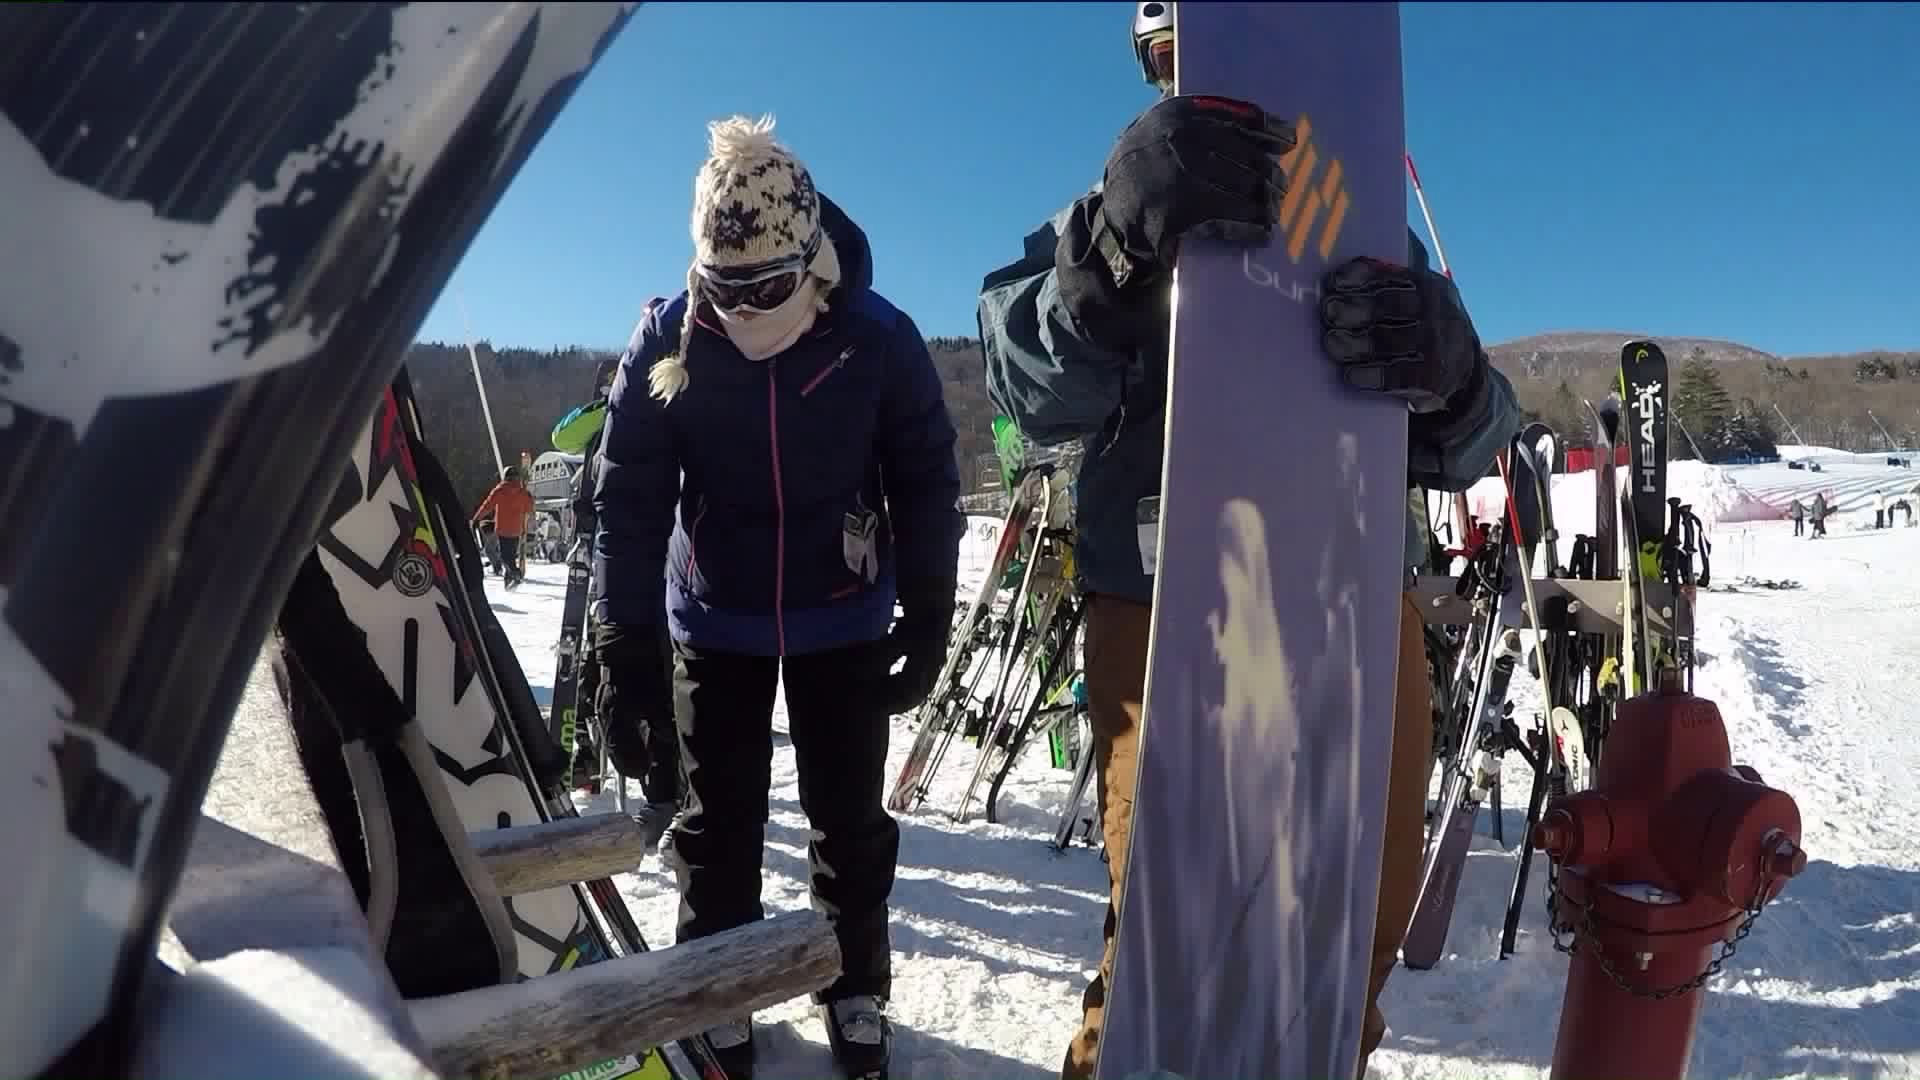 Daytrippers: Hitting the slopes